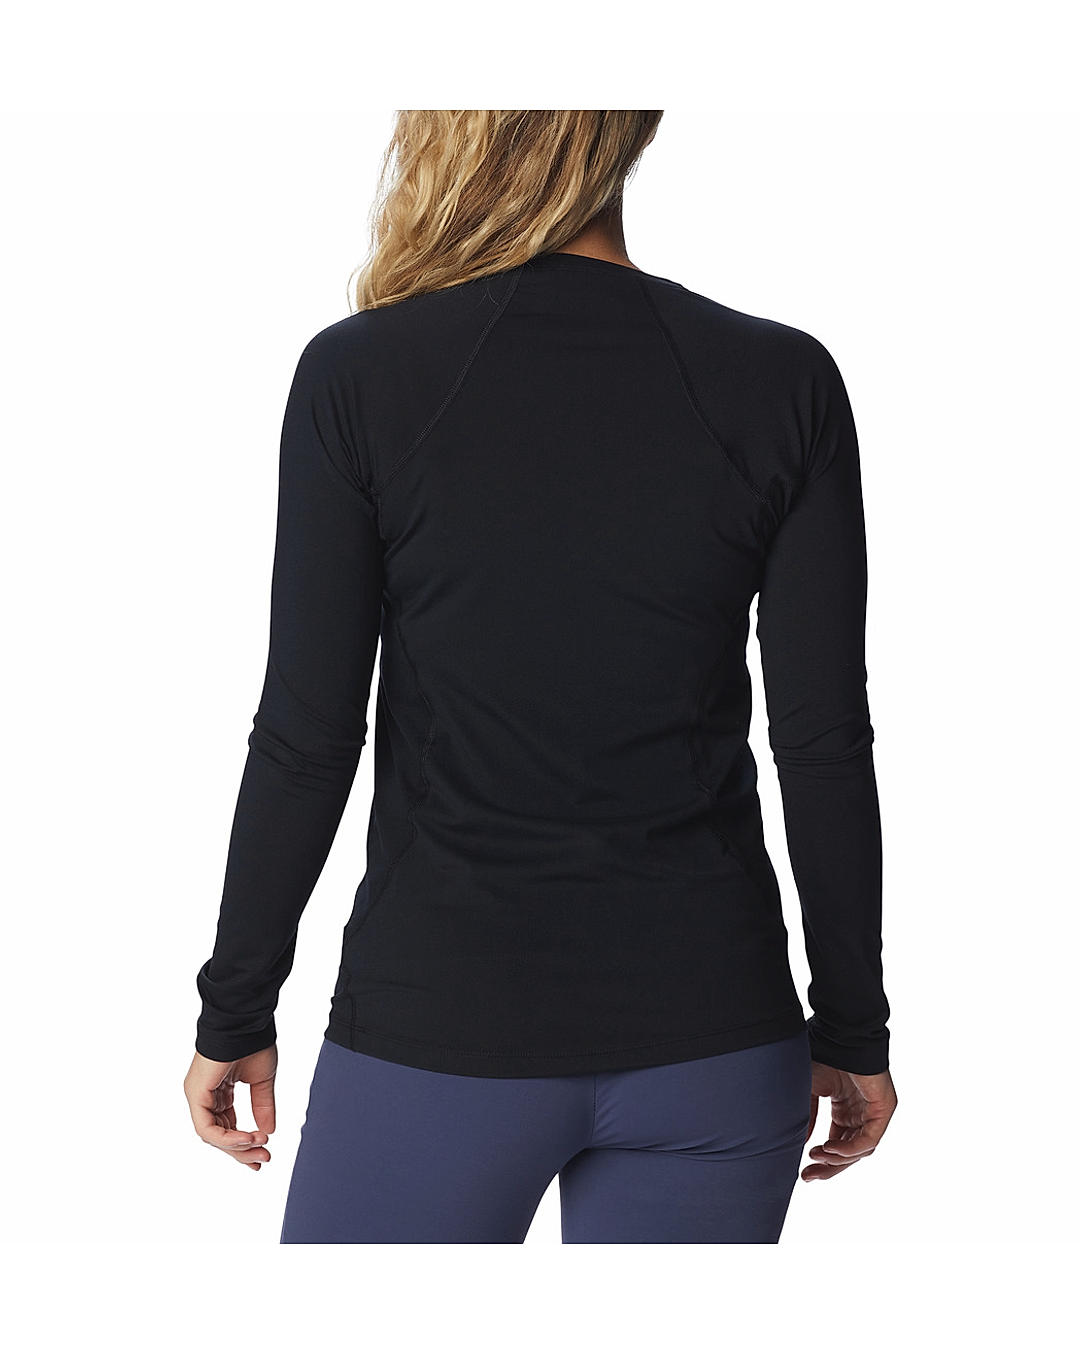 Columbia Women Black Midweight Stretch Long Sleeve Top Thermal Wear (Anti-odor Baselayer)